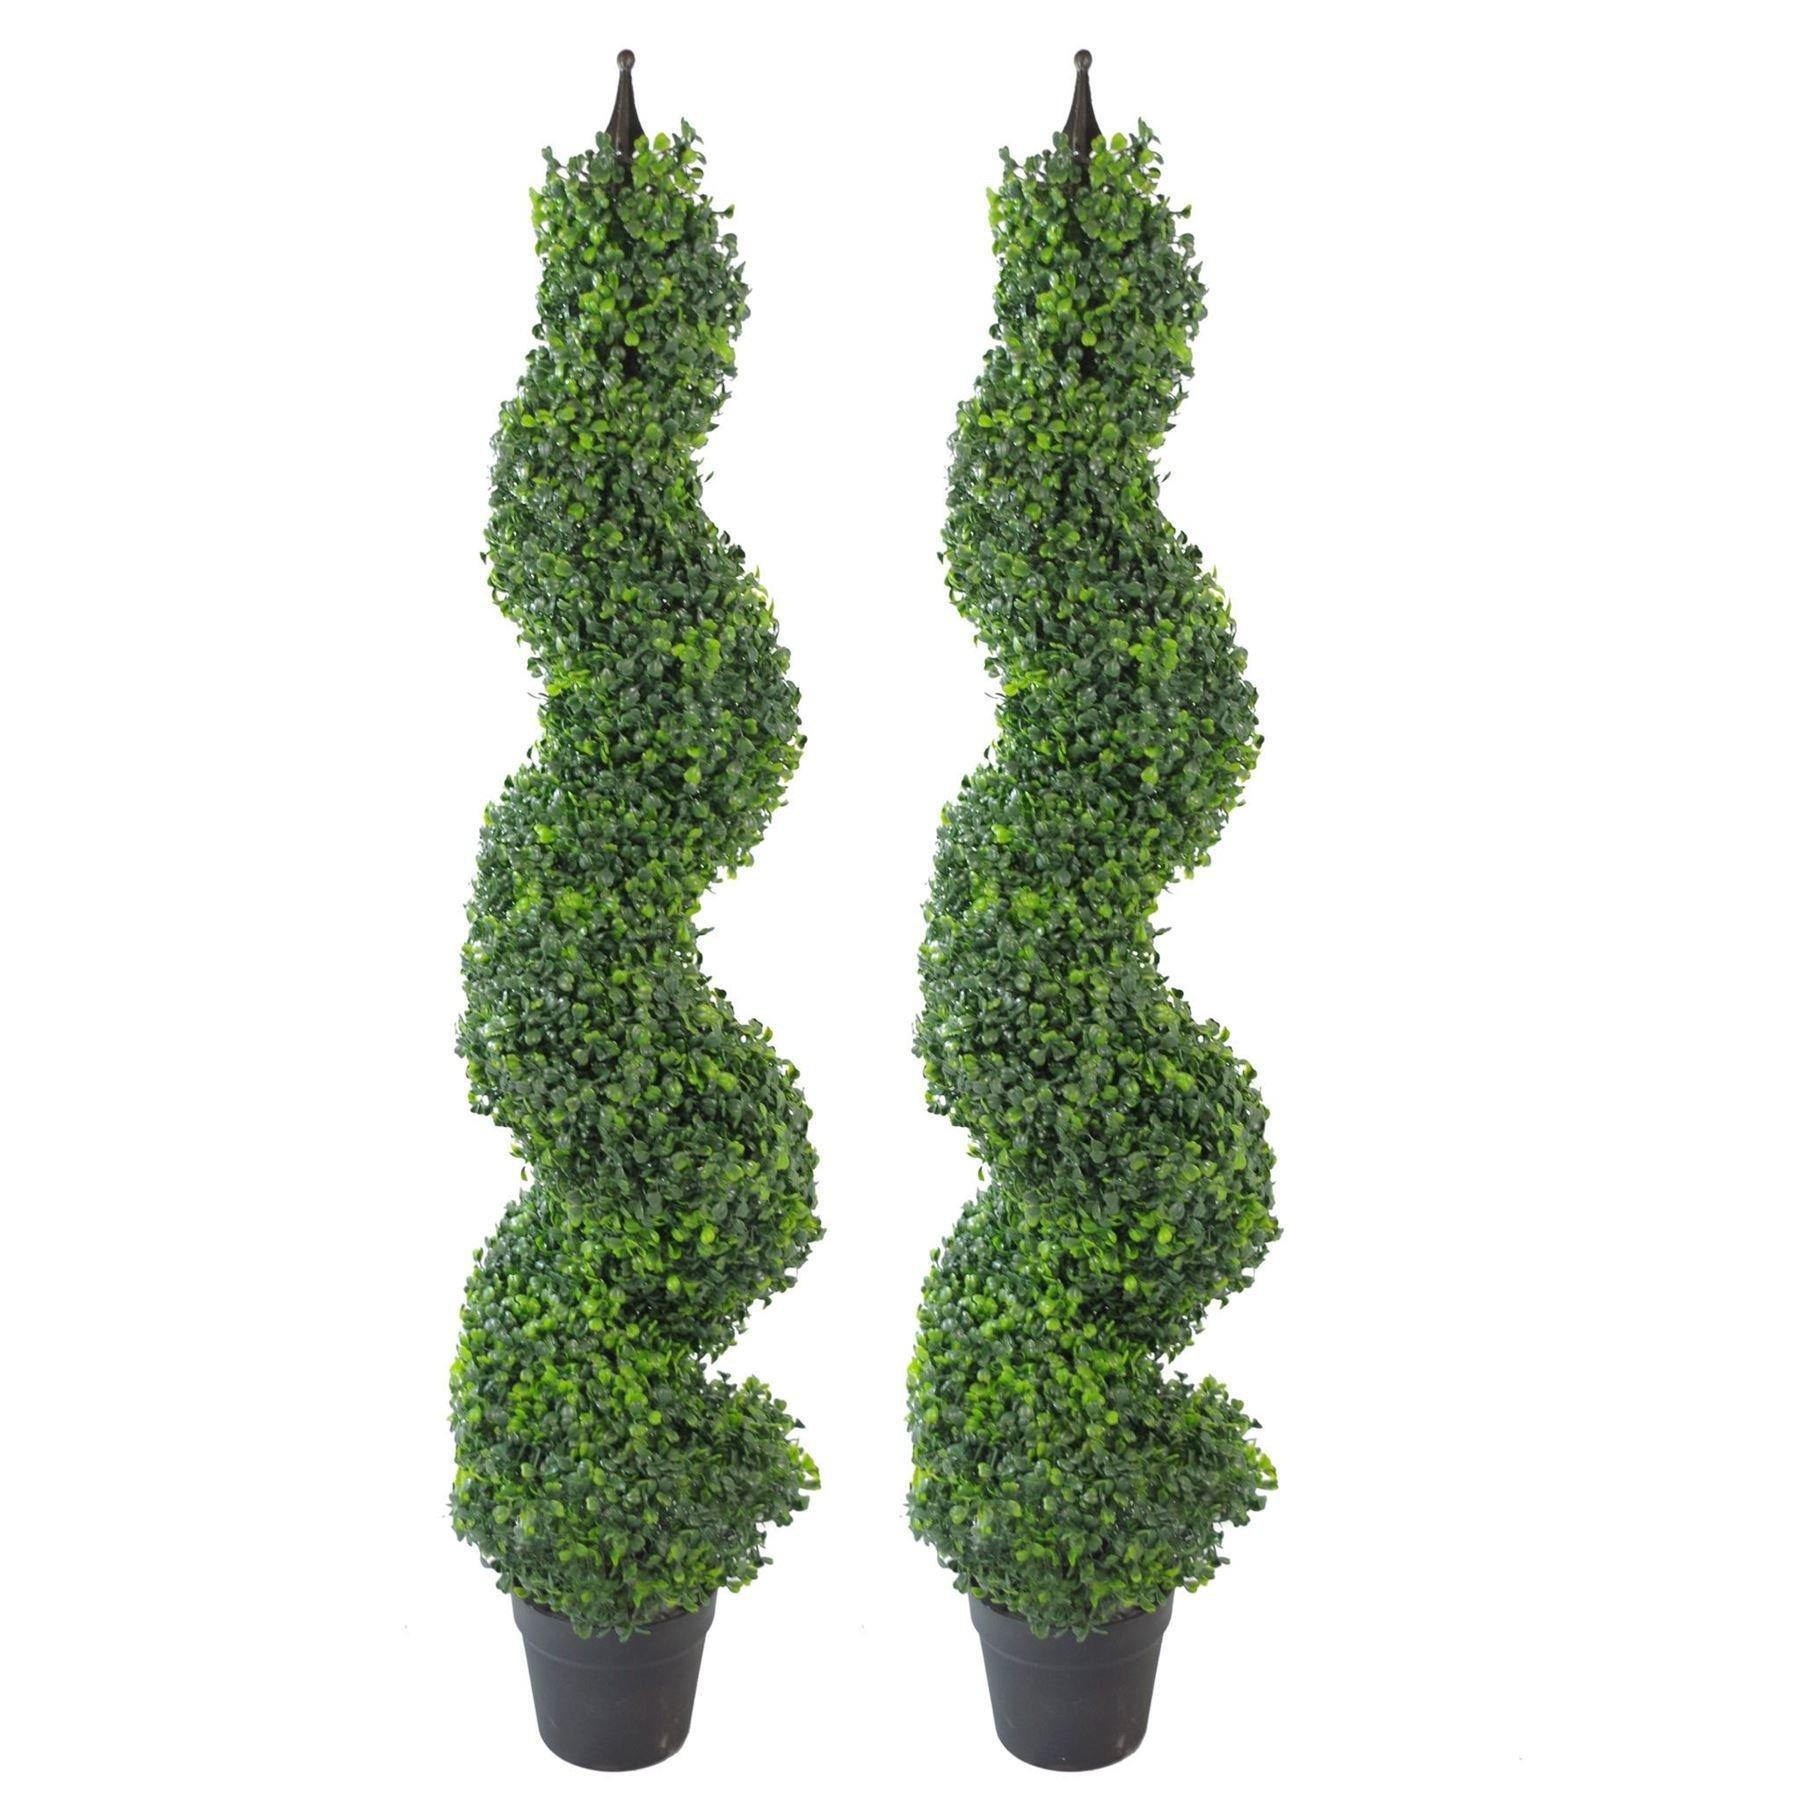 Pair of 120cm (4ft) Tall Artificial Boxwood Tower Trees Topiary Spiral Metal Top - image 1